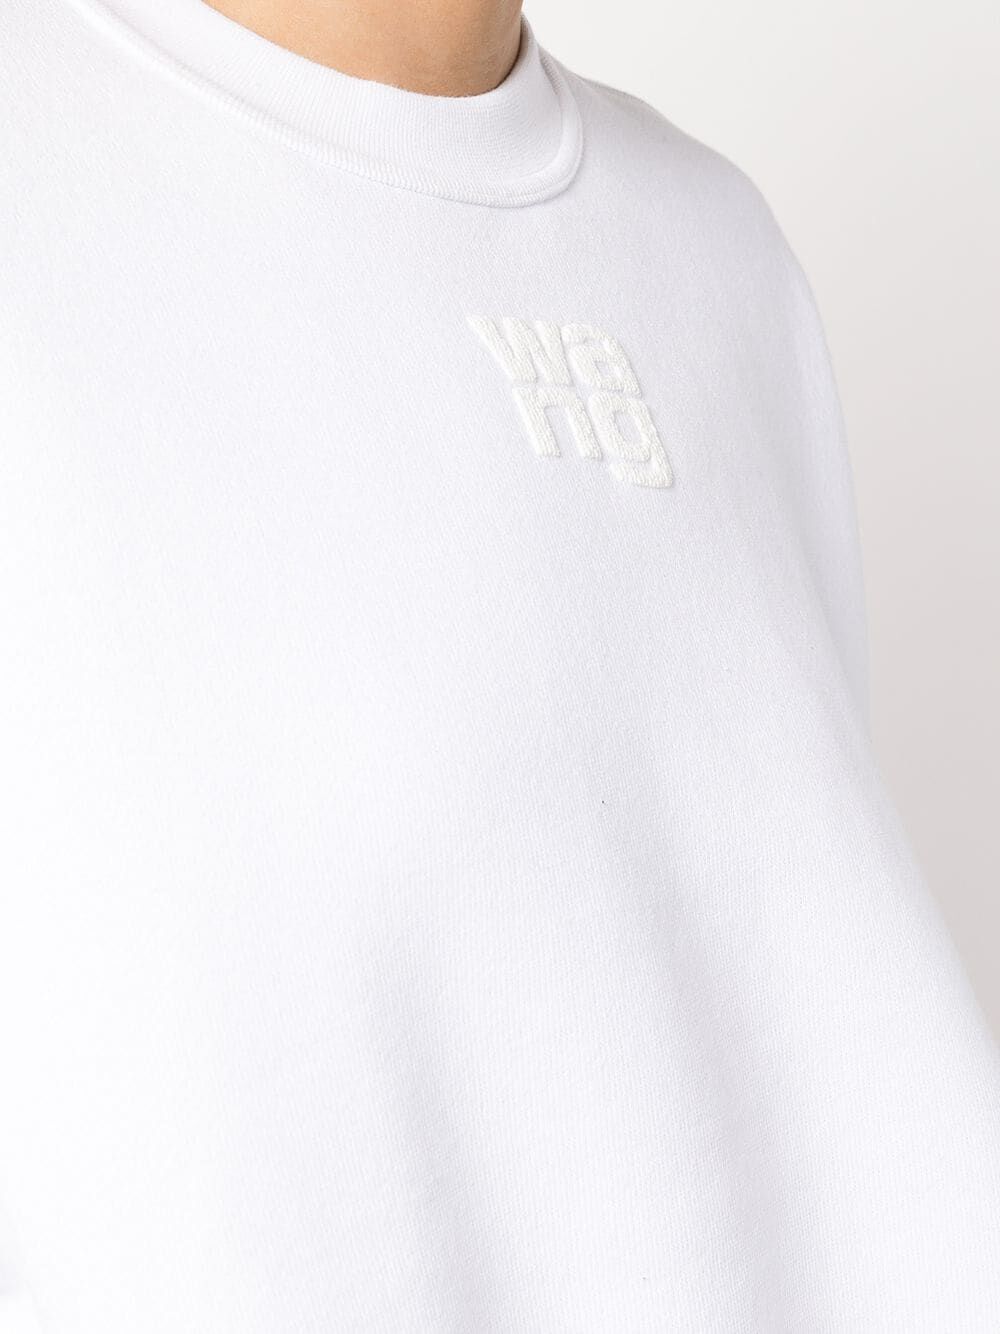 Essential Terry Crew Sweatshirt With Puff Paint Logo